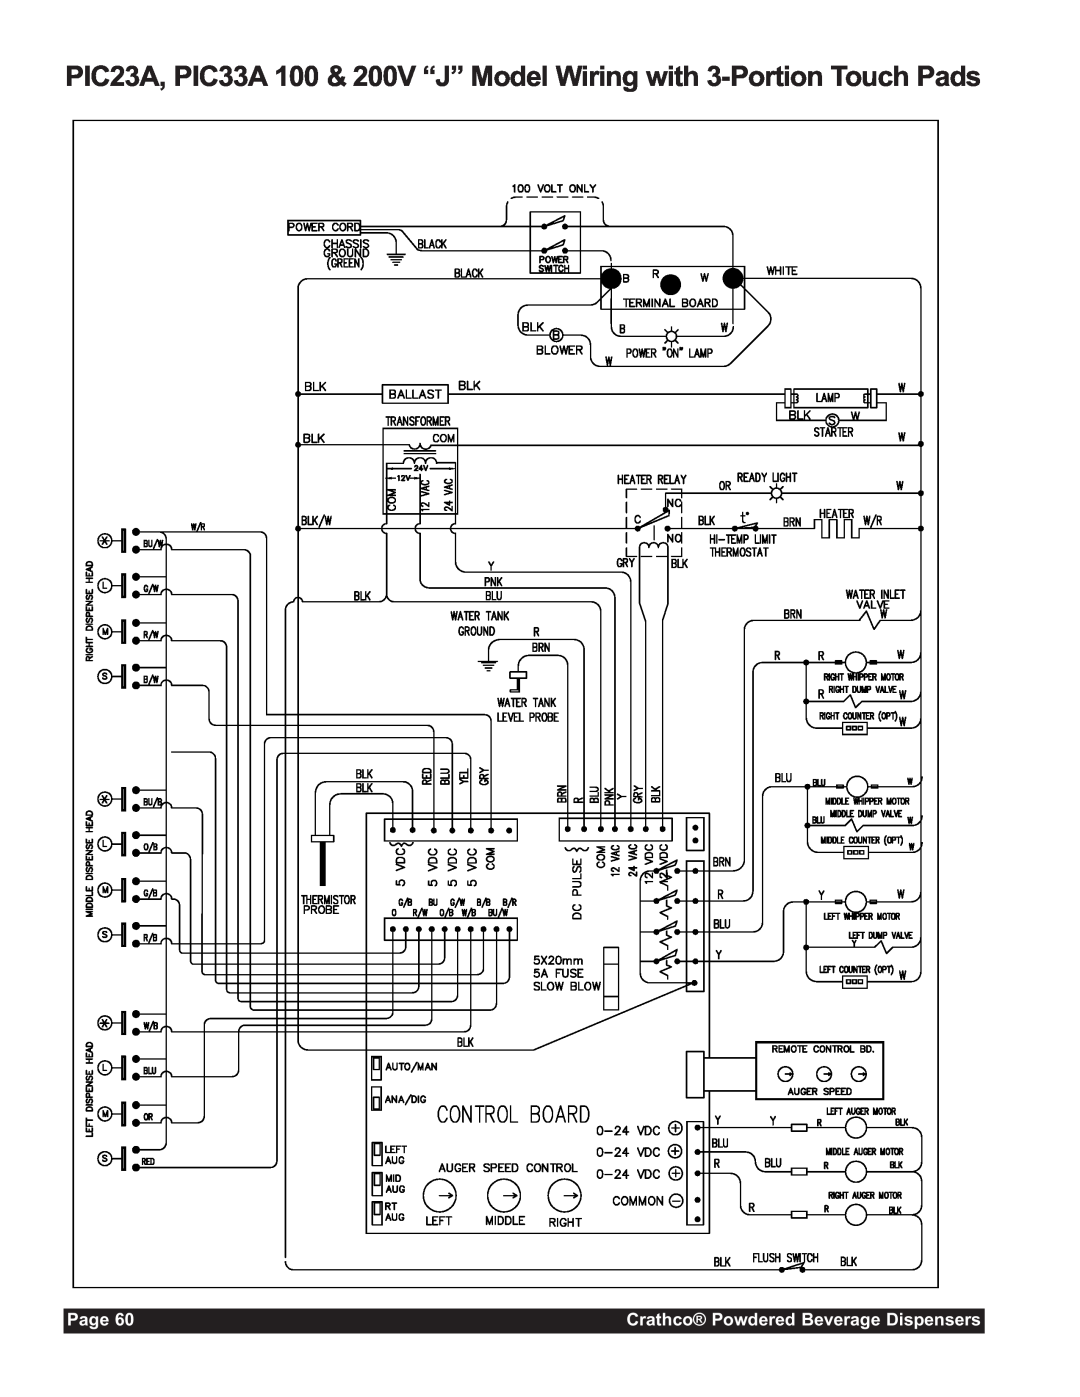 Grindmaster CC-302-20 service manual PIC23A, PIC33A 100 & 200V “J” Model Wiring with 3-Portion Touch Pads, Page 